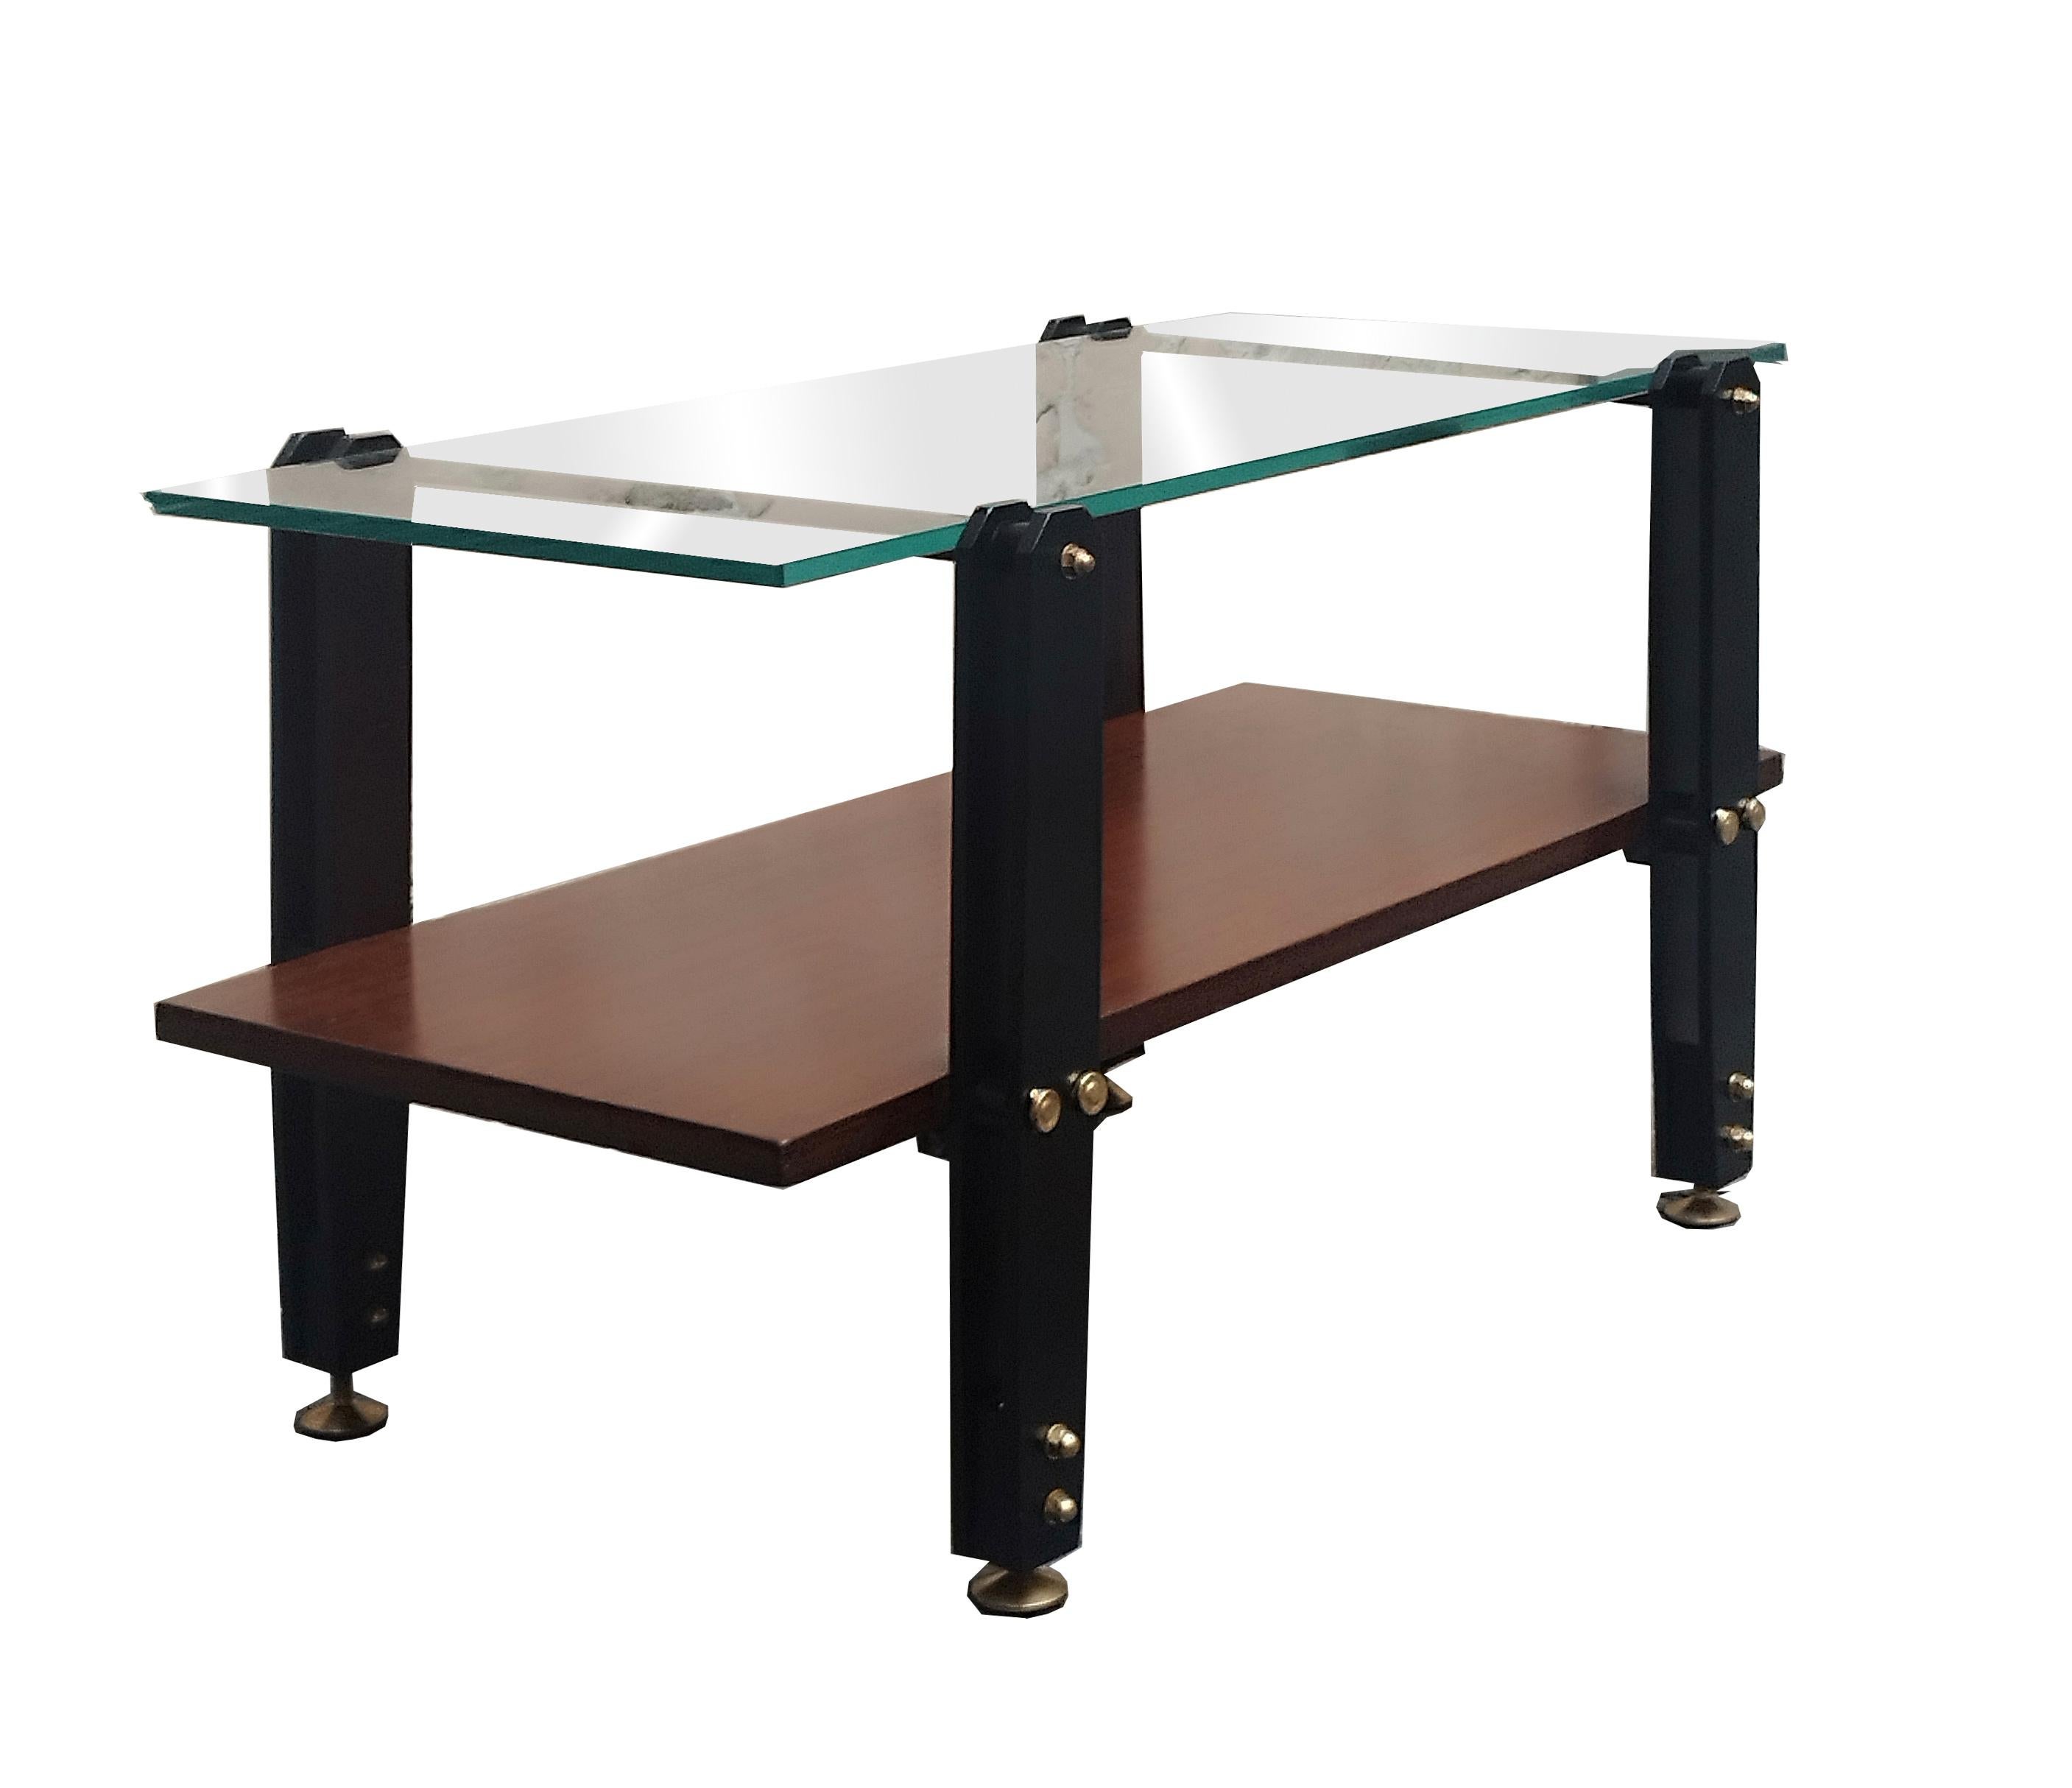 Low Italian wooden coffee table,brass and metal frame, with a thick glass top. Small chip on the corner